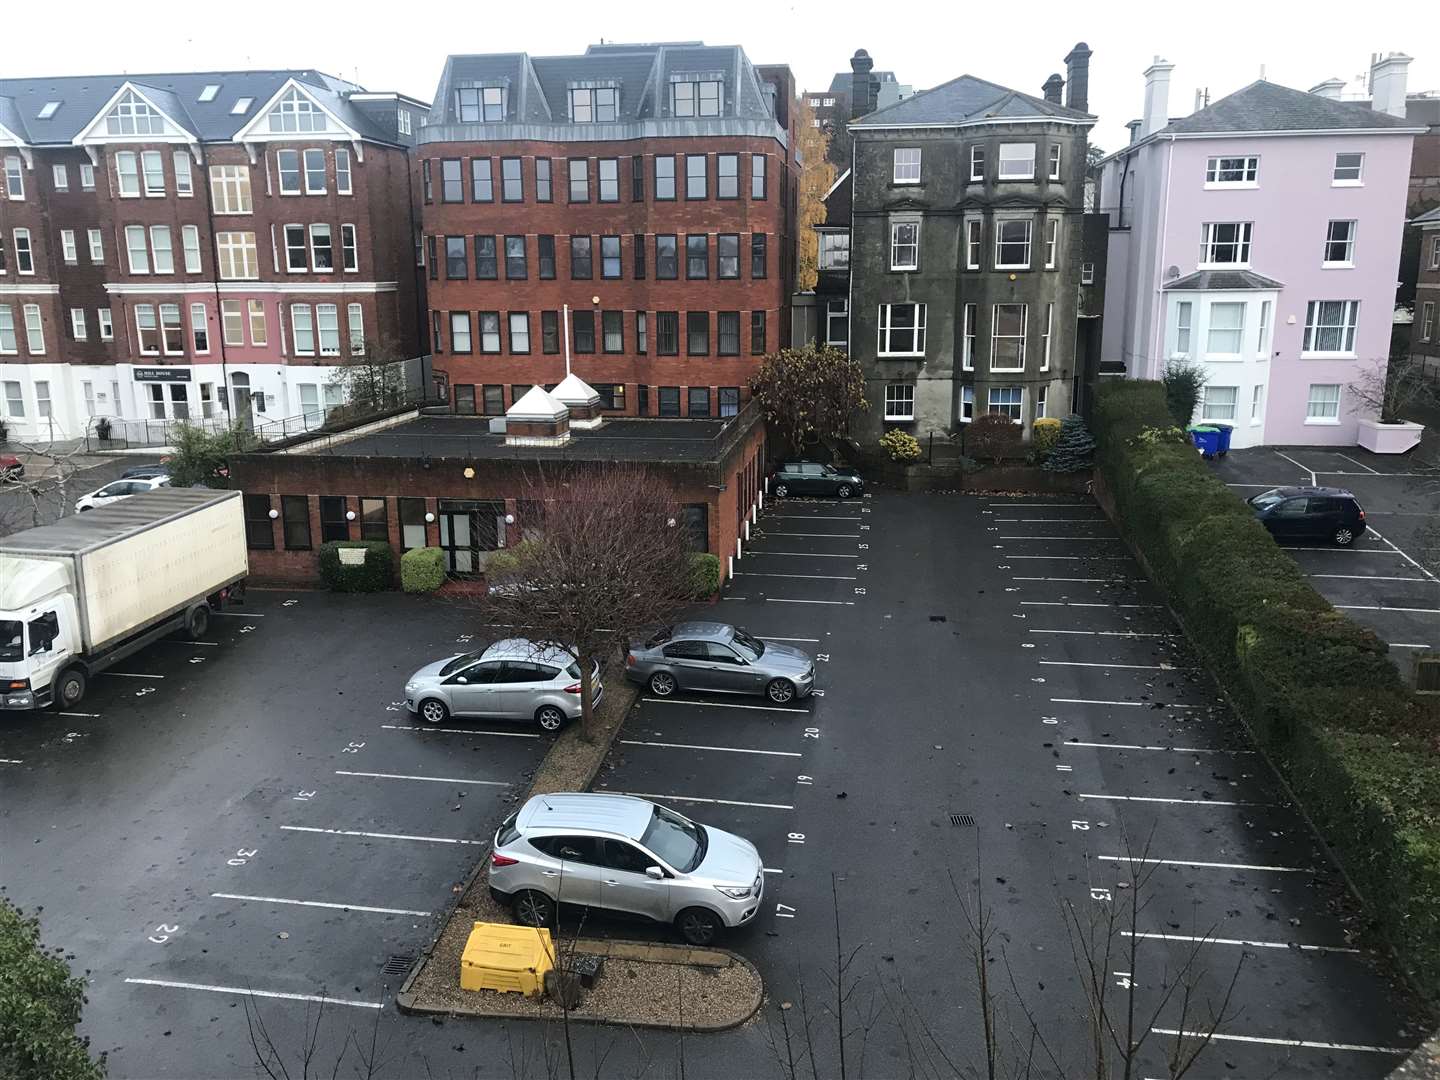 Site of the proposed new office block in Tunbridge Wells